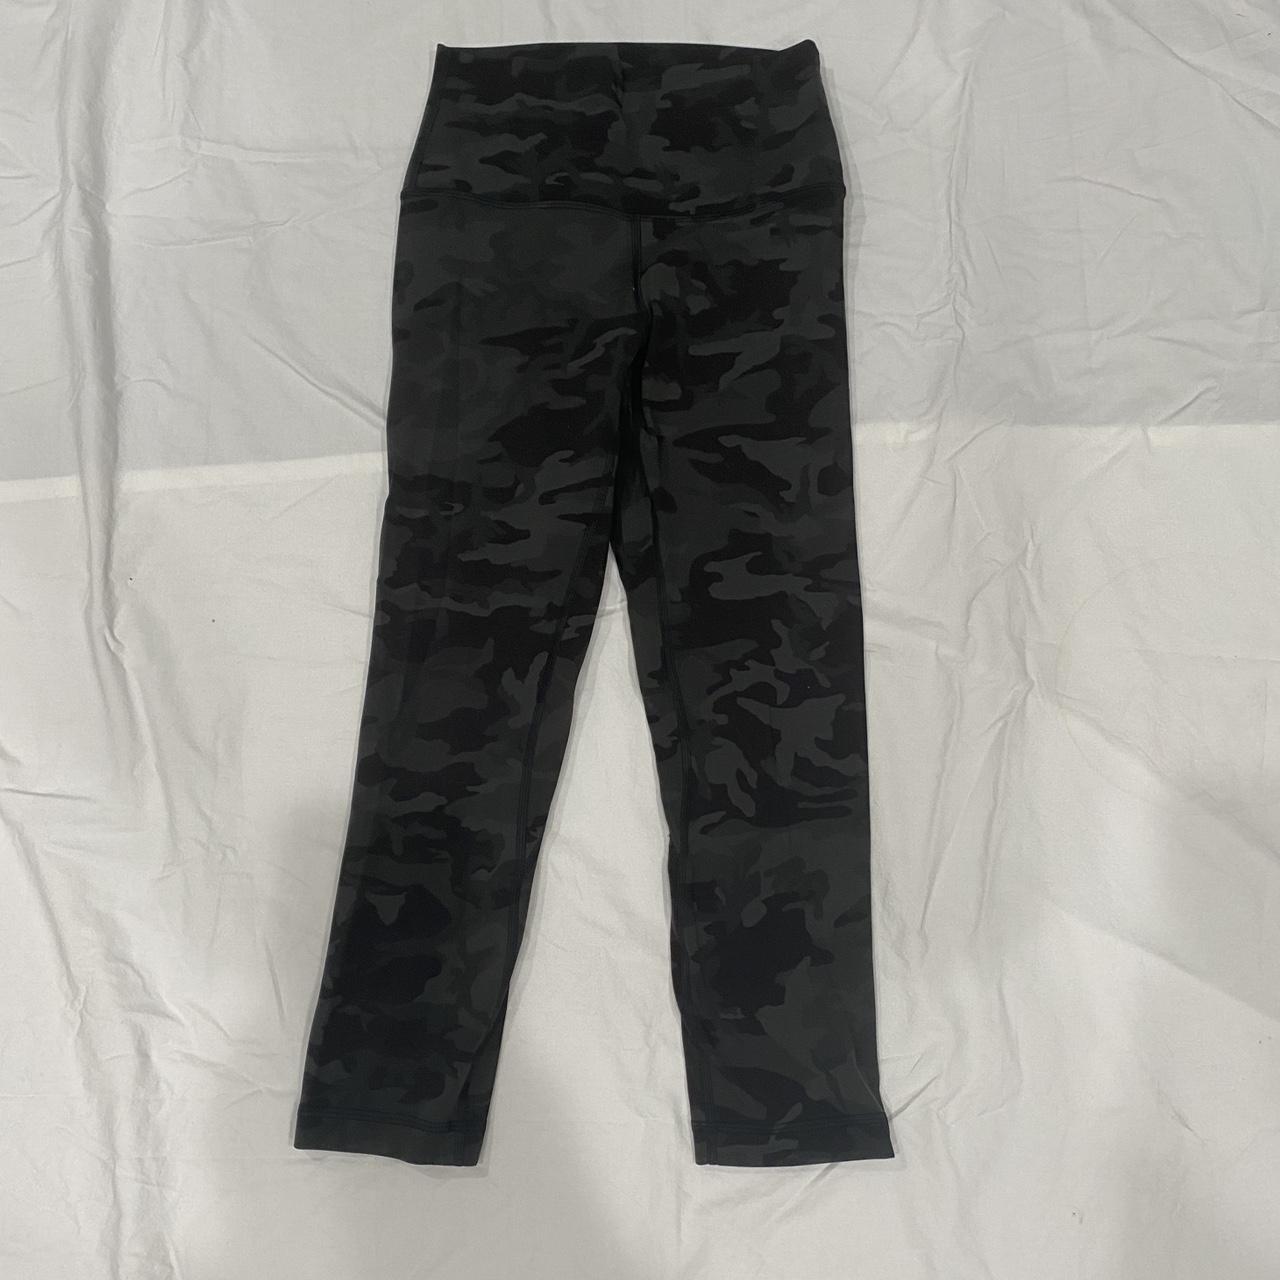 Camo leggings they are around a size 4 and have - Depop